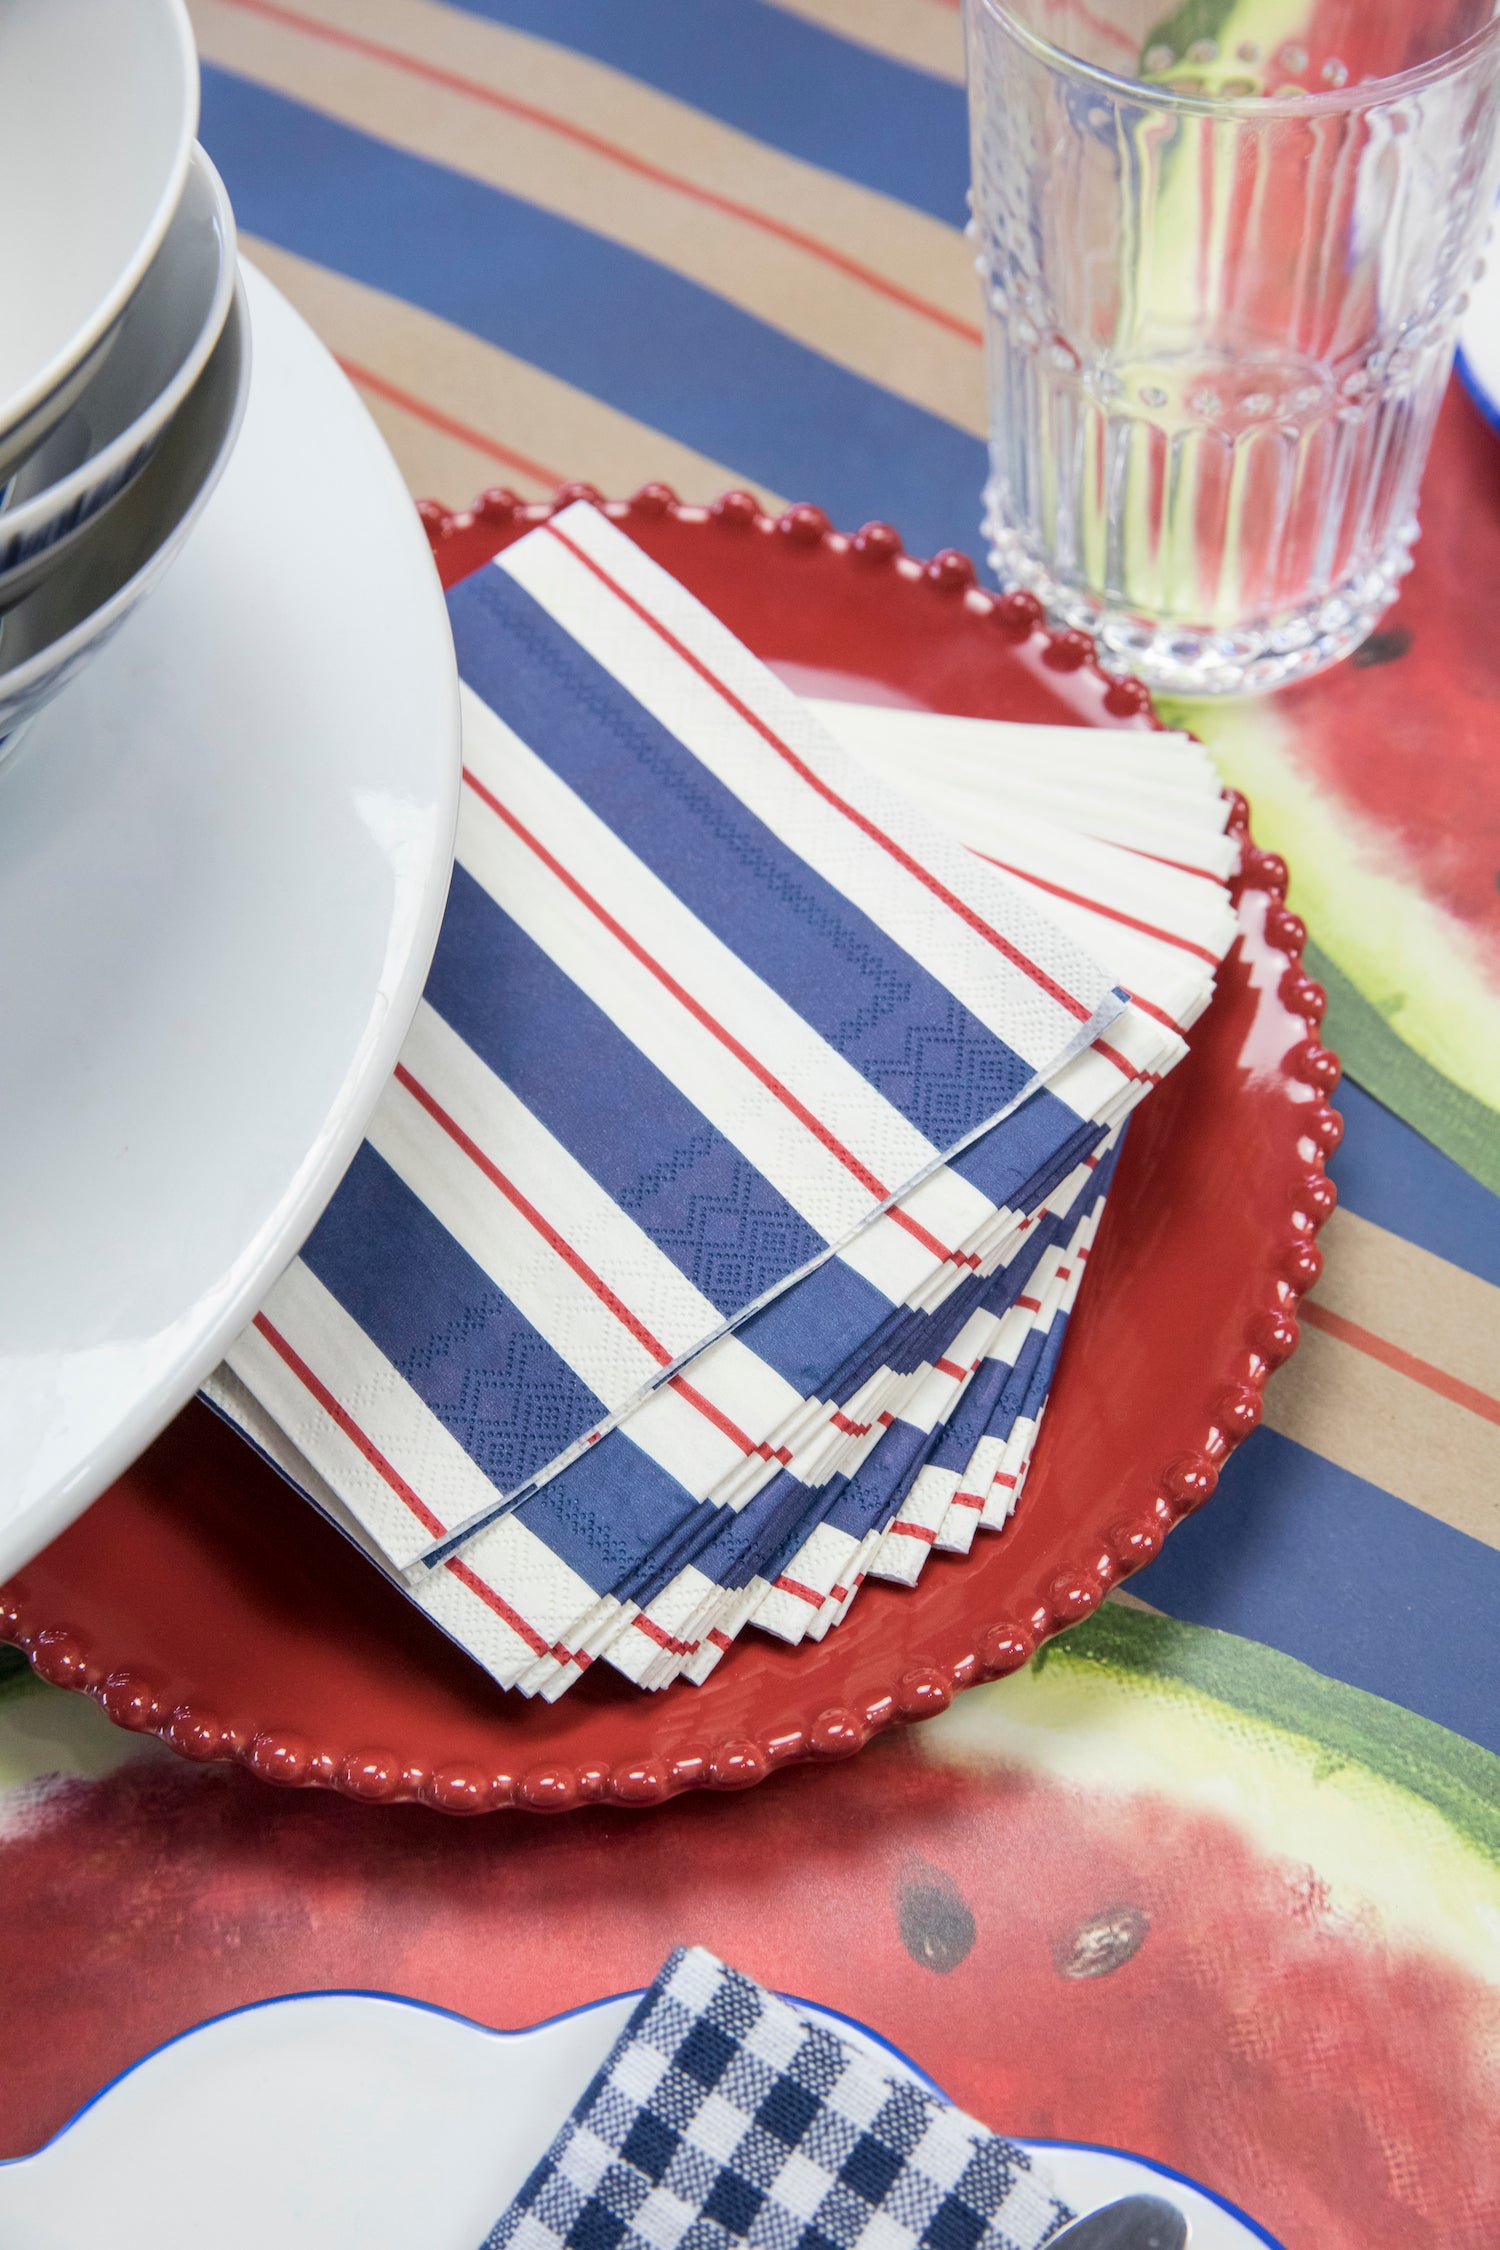 A festive table setting with Navy &amp; Red Awning Stripe Napkins, perfect for a patriotic party by Hester &amp; Cook.